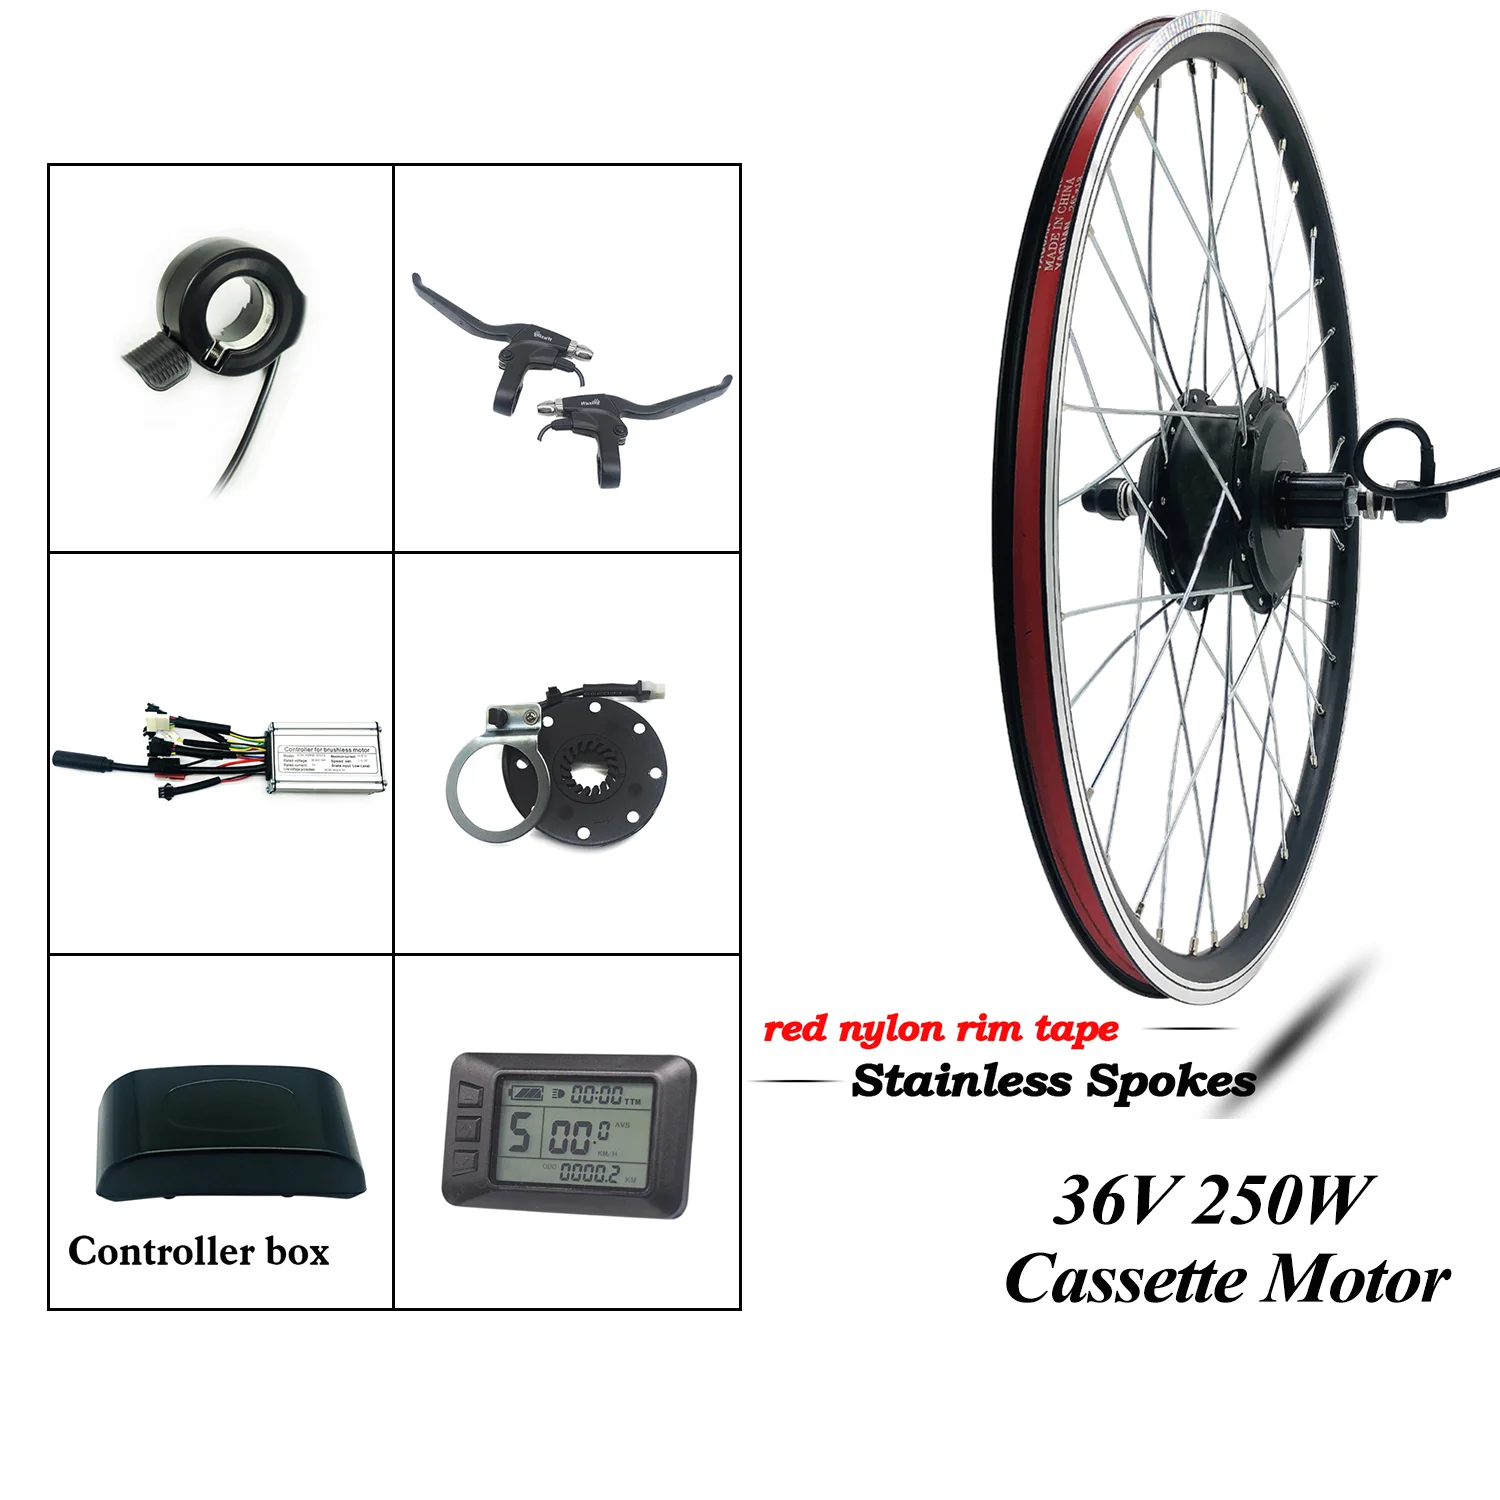 

Greenpedel electric bicycle motor kit 36v 250w 26 inch cassette wheel bicycle electric motor conversion kit with display